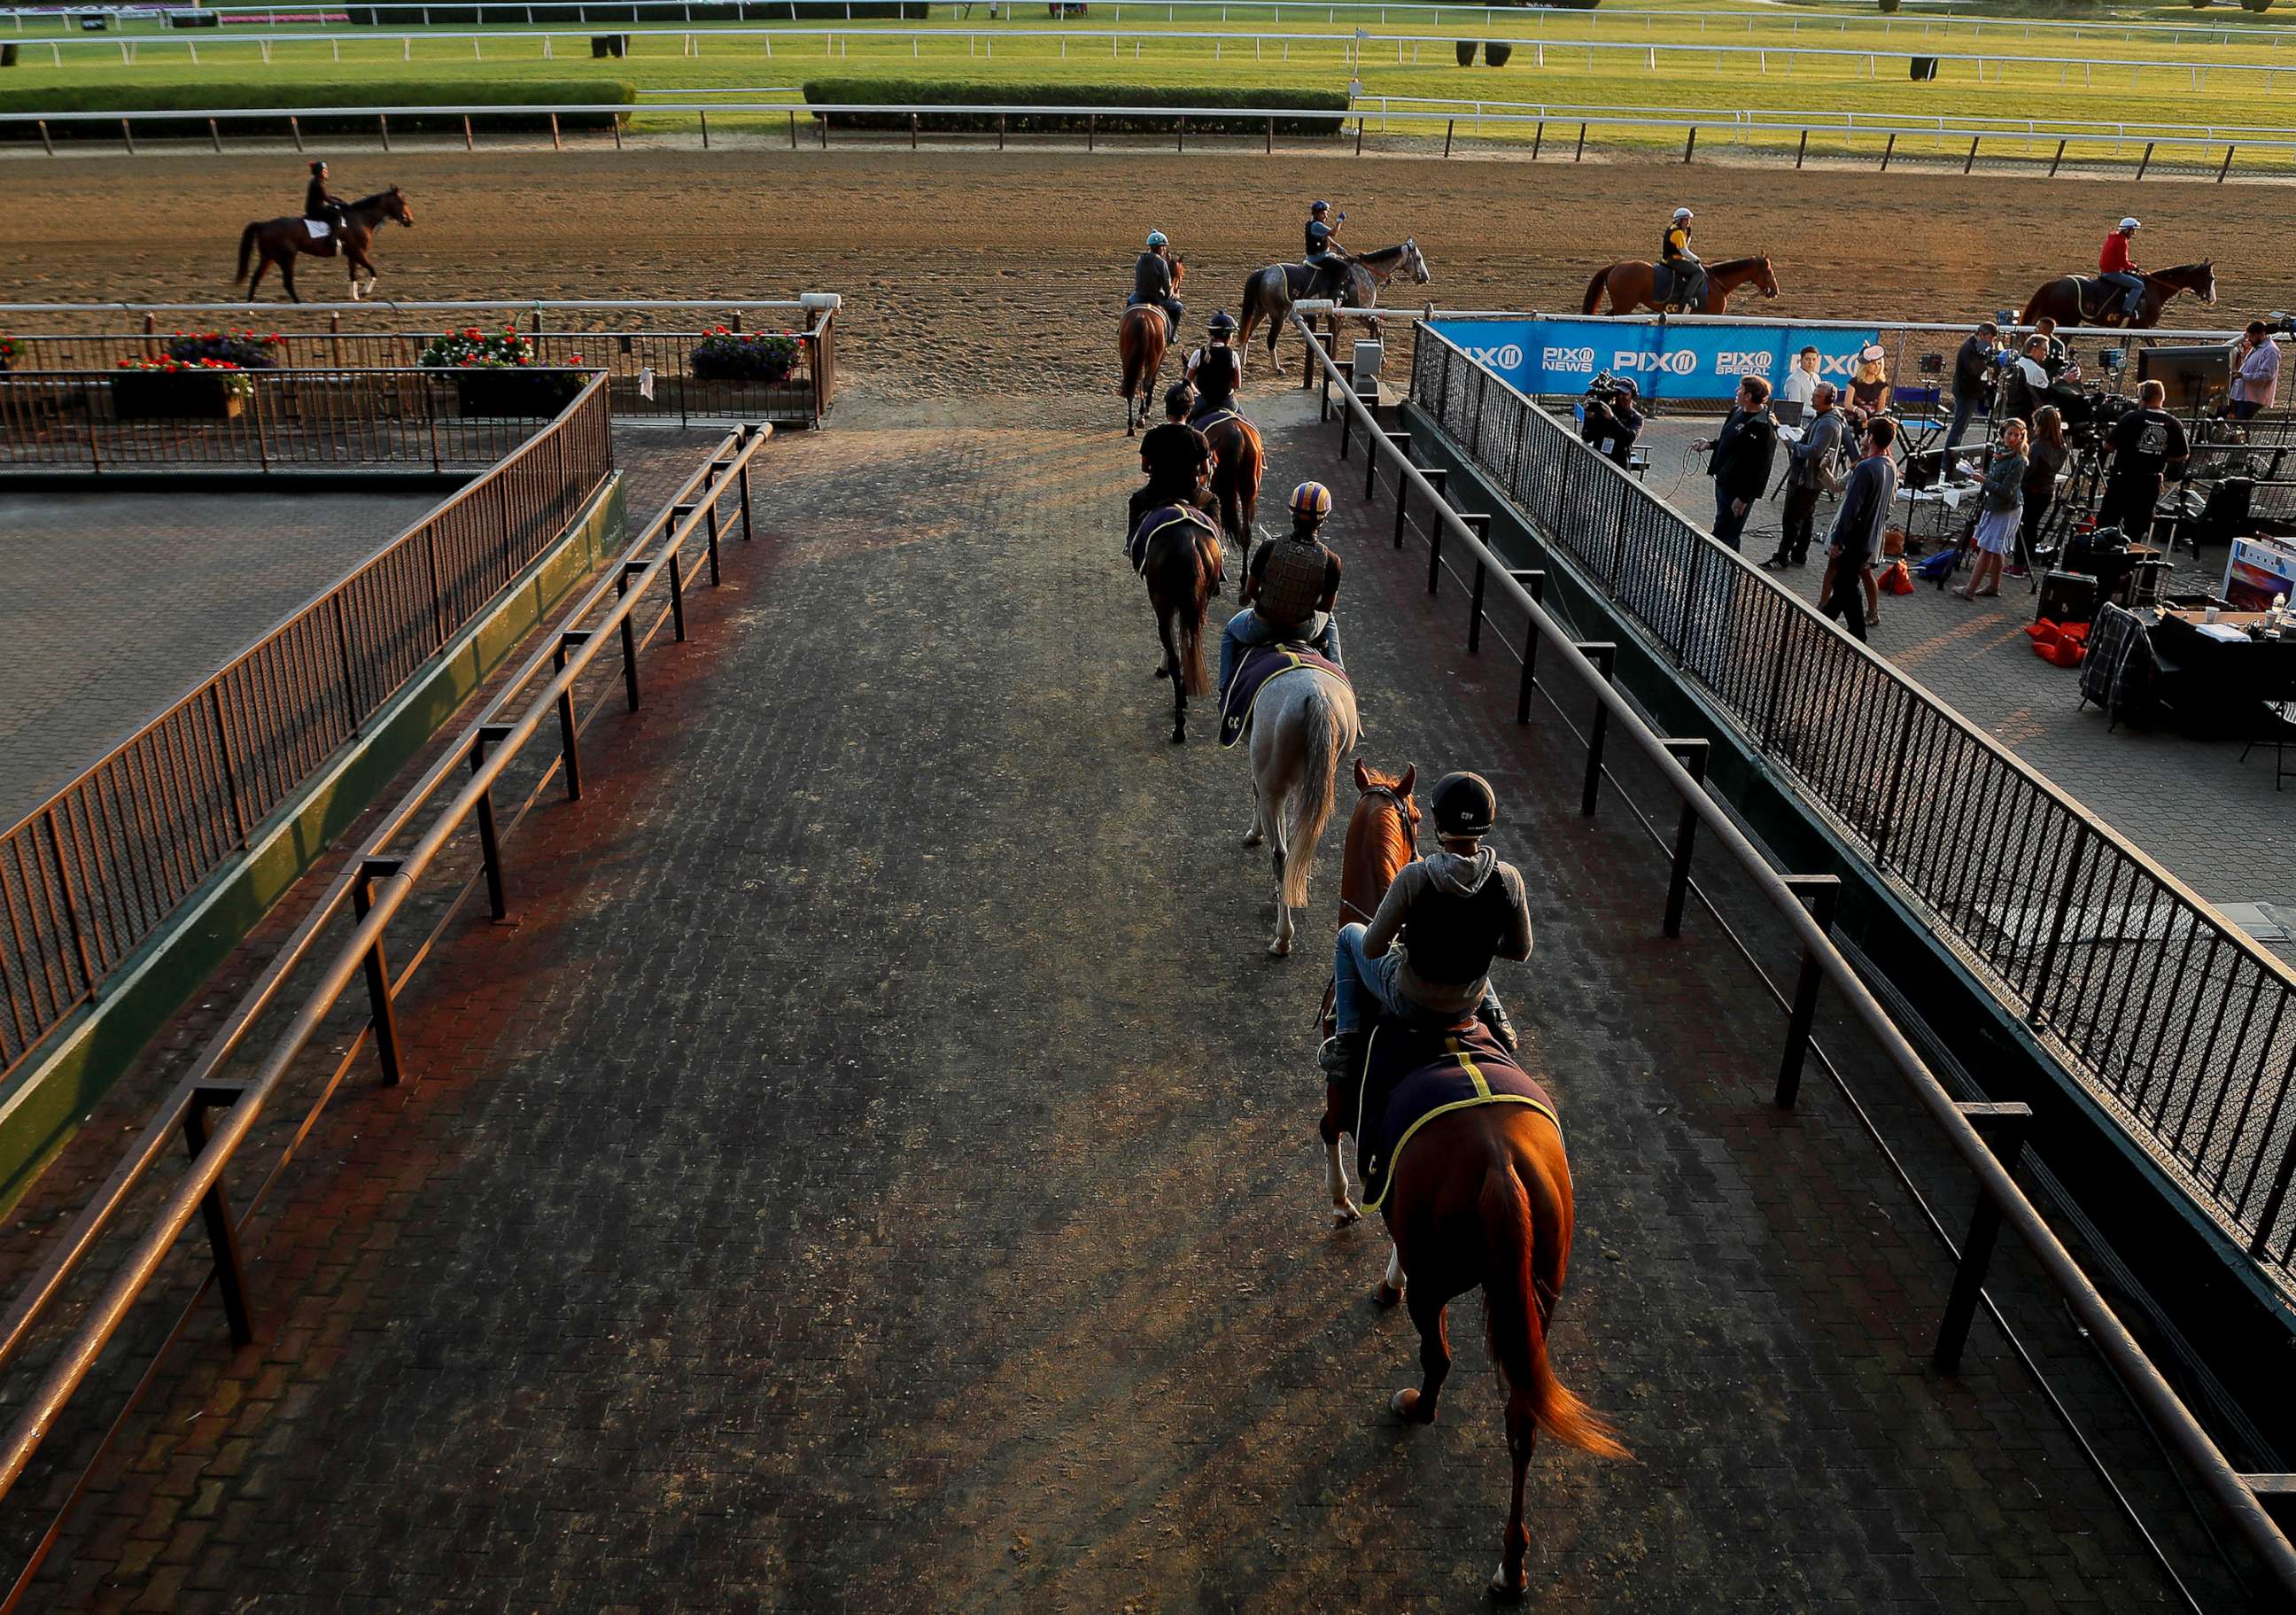 PHOTO: In this June 8, 2018, file photo, thoroughbreds enter the main track at Belmont Park, in Elmont, N.Y.